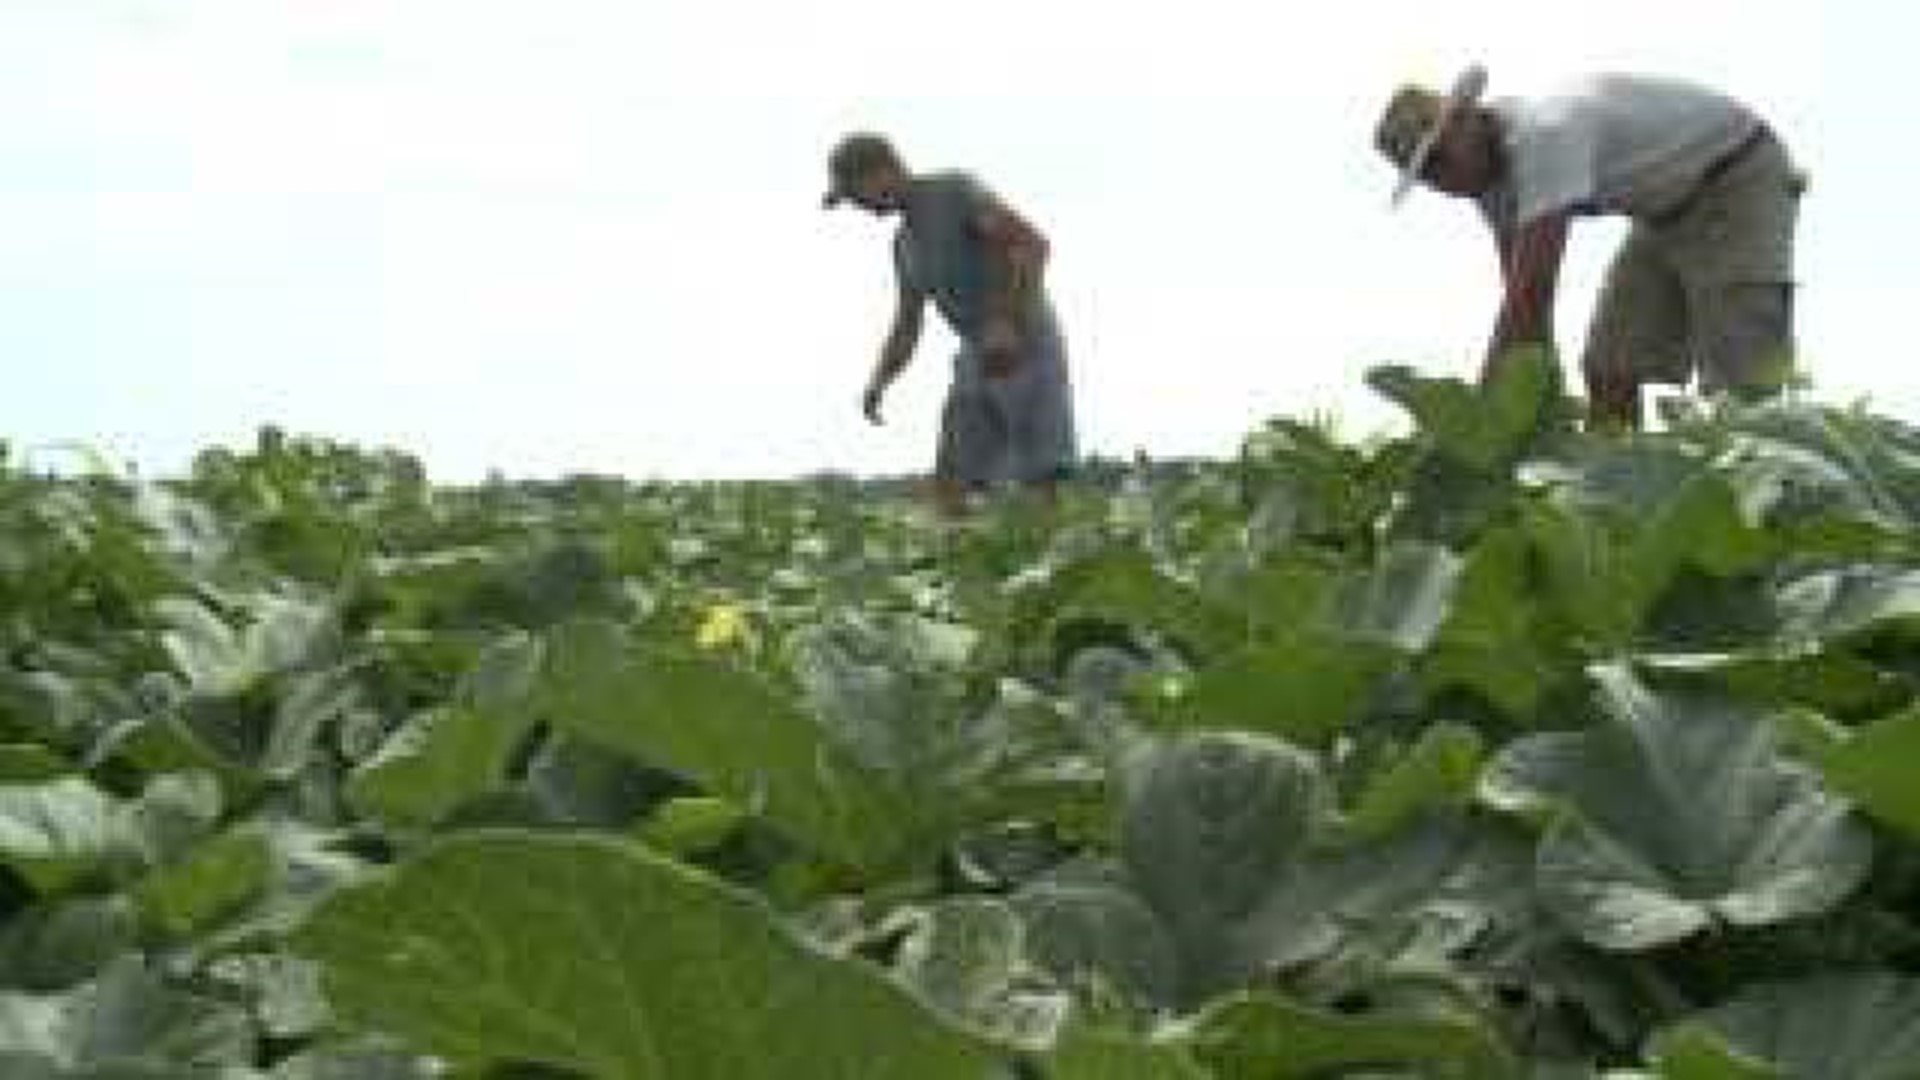 Henry County farmers reflect on drought and produce prices